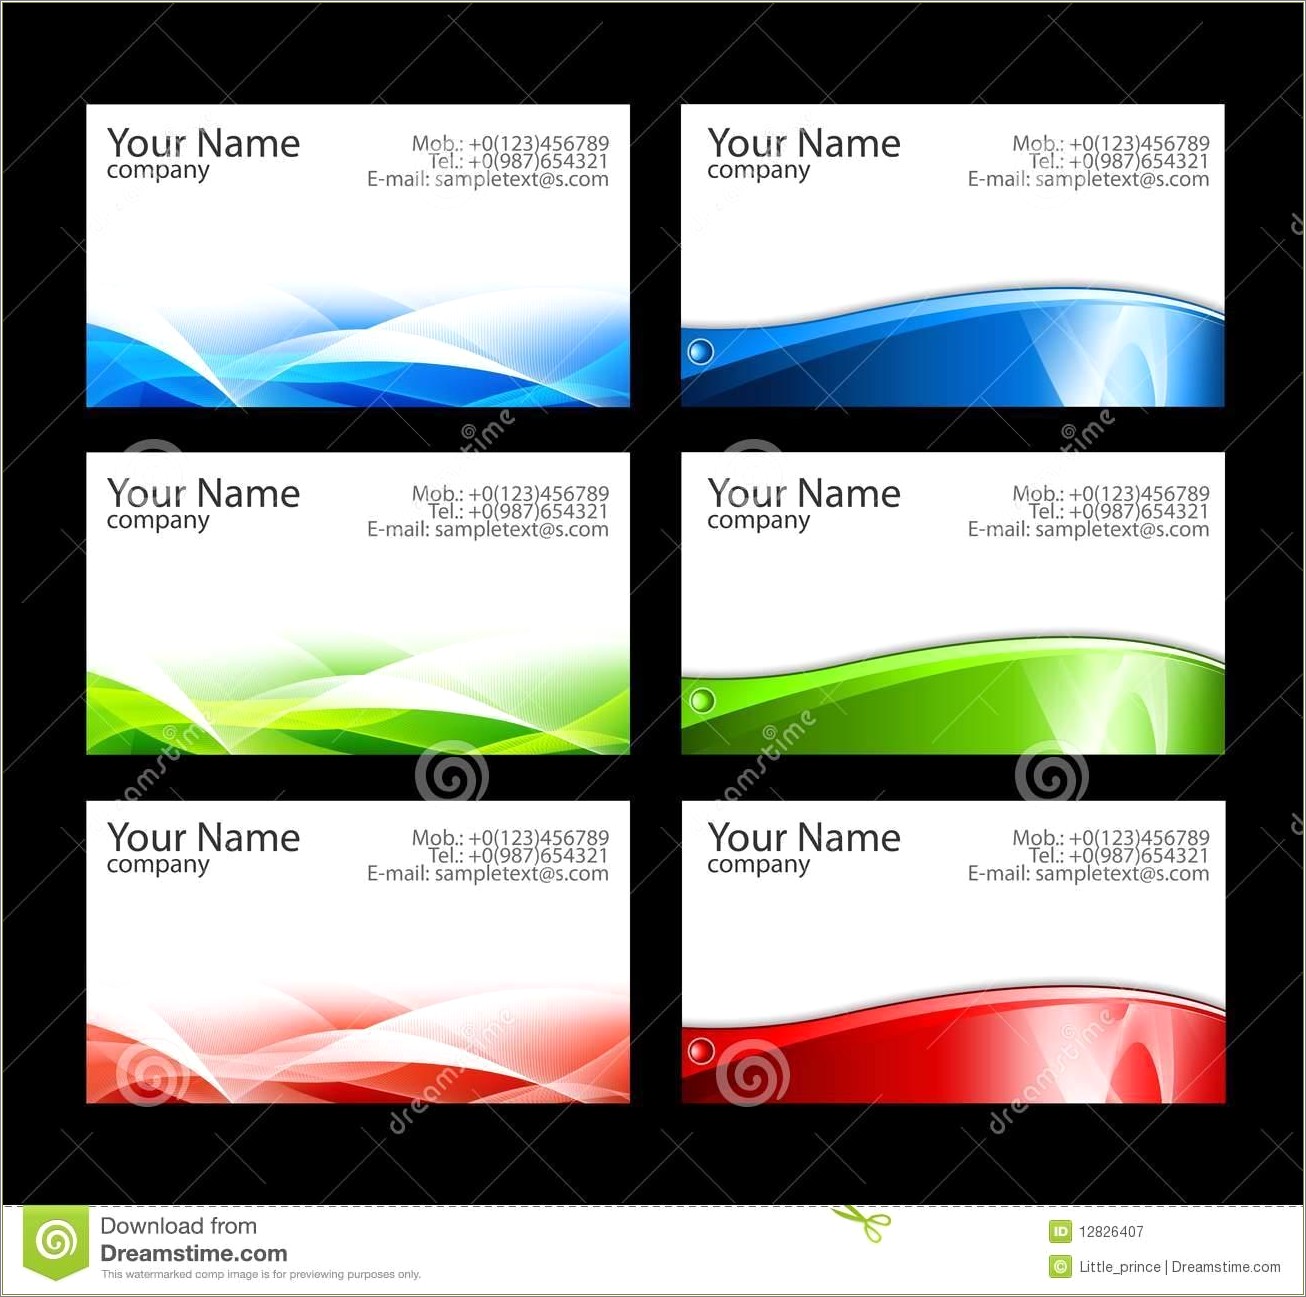 Free Business Cards Templates Word 2010